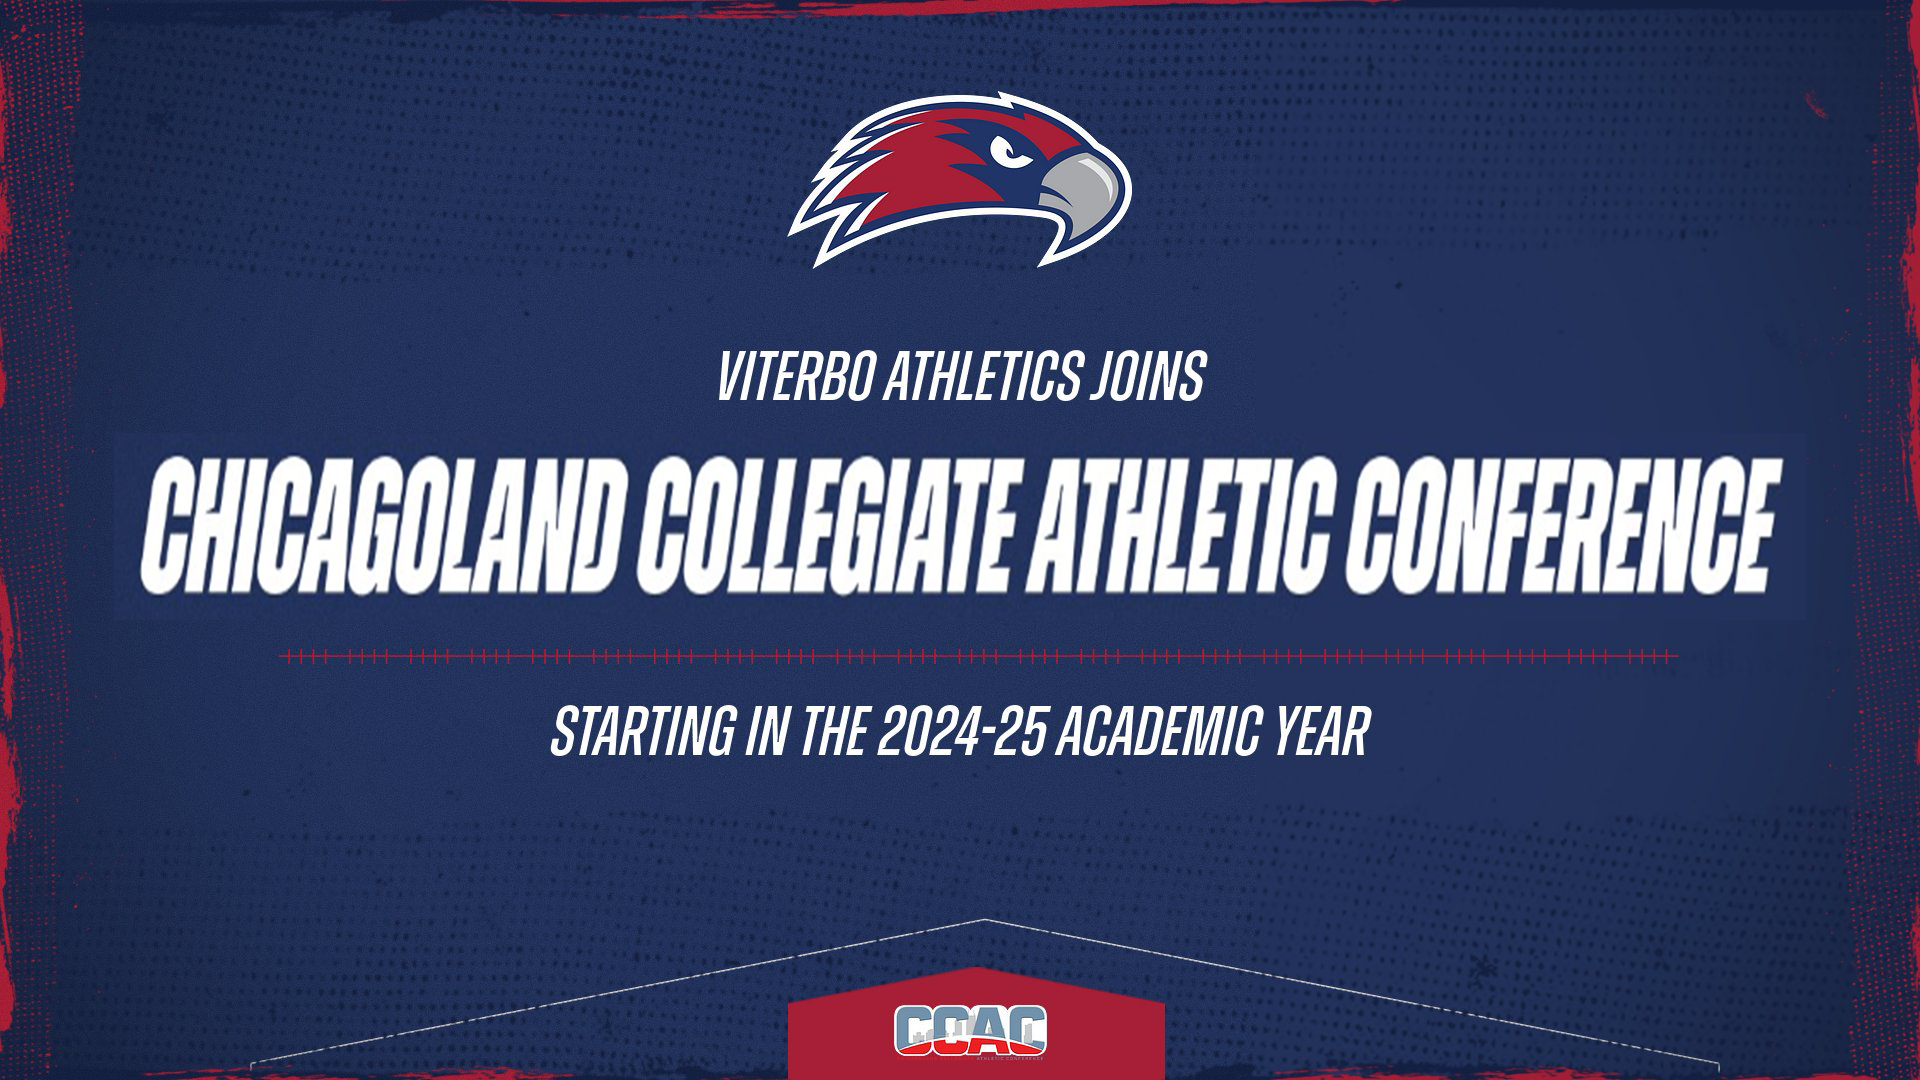 Viterbo Athletics Joins Chicagoland Collegiate Athletic Conference